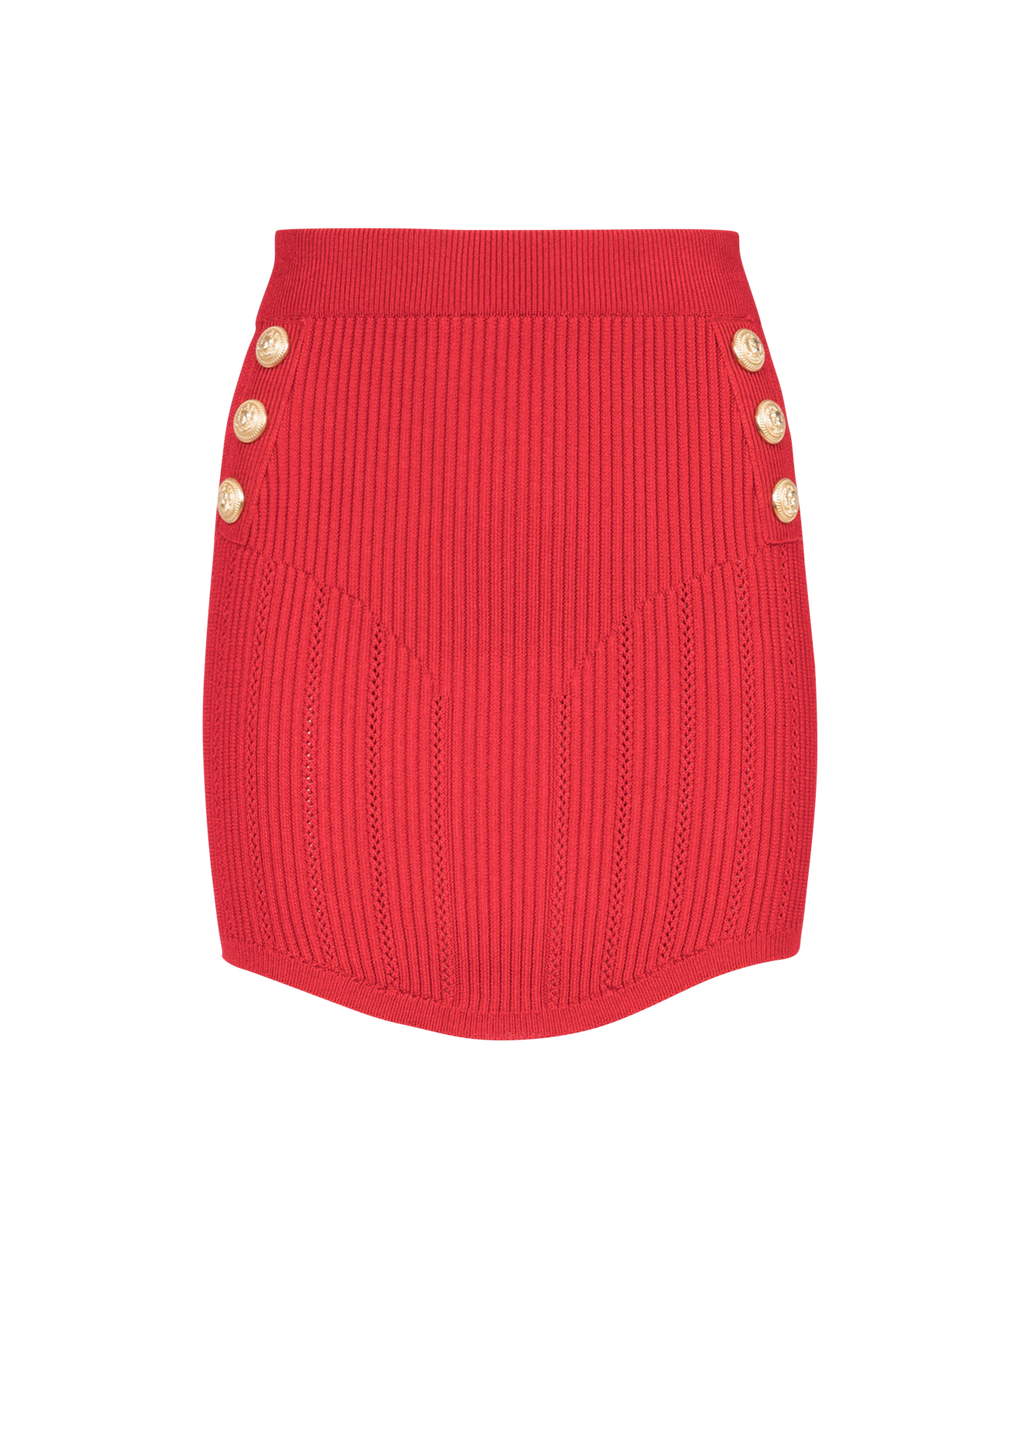 Short eco-designed knit skirt with double-buttoned fastening, red, hi-res